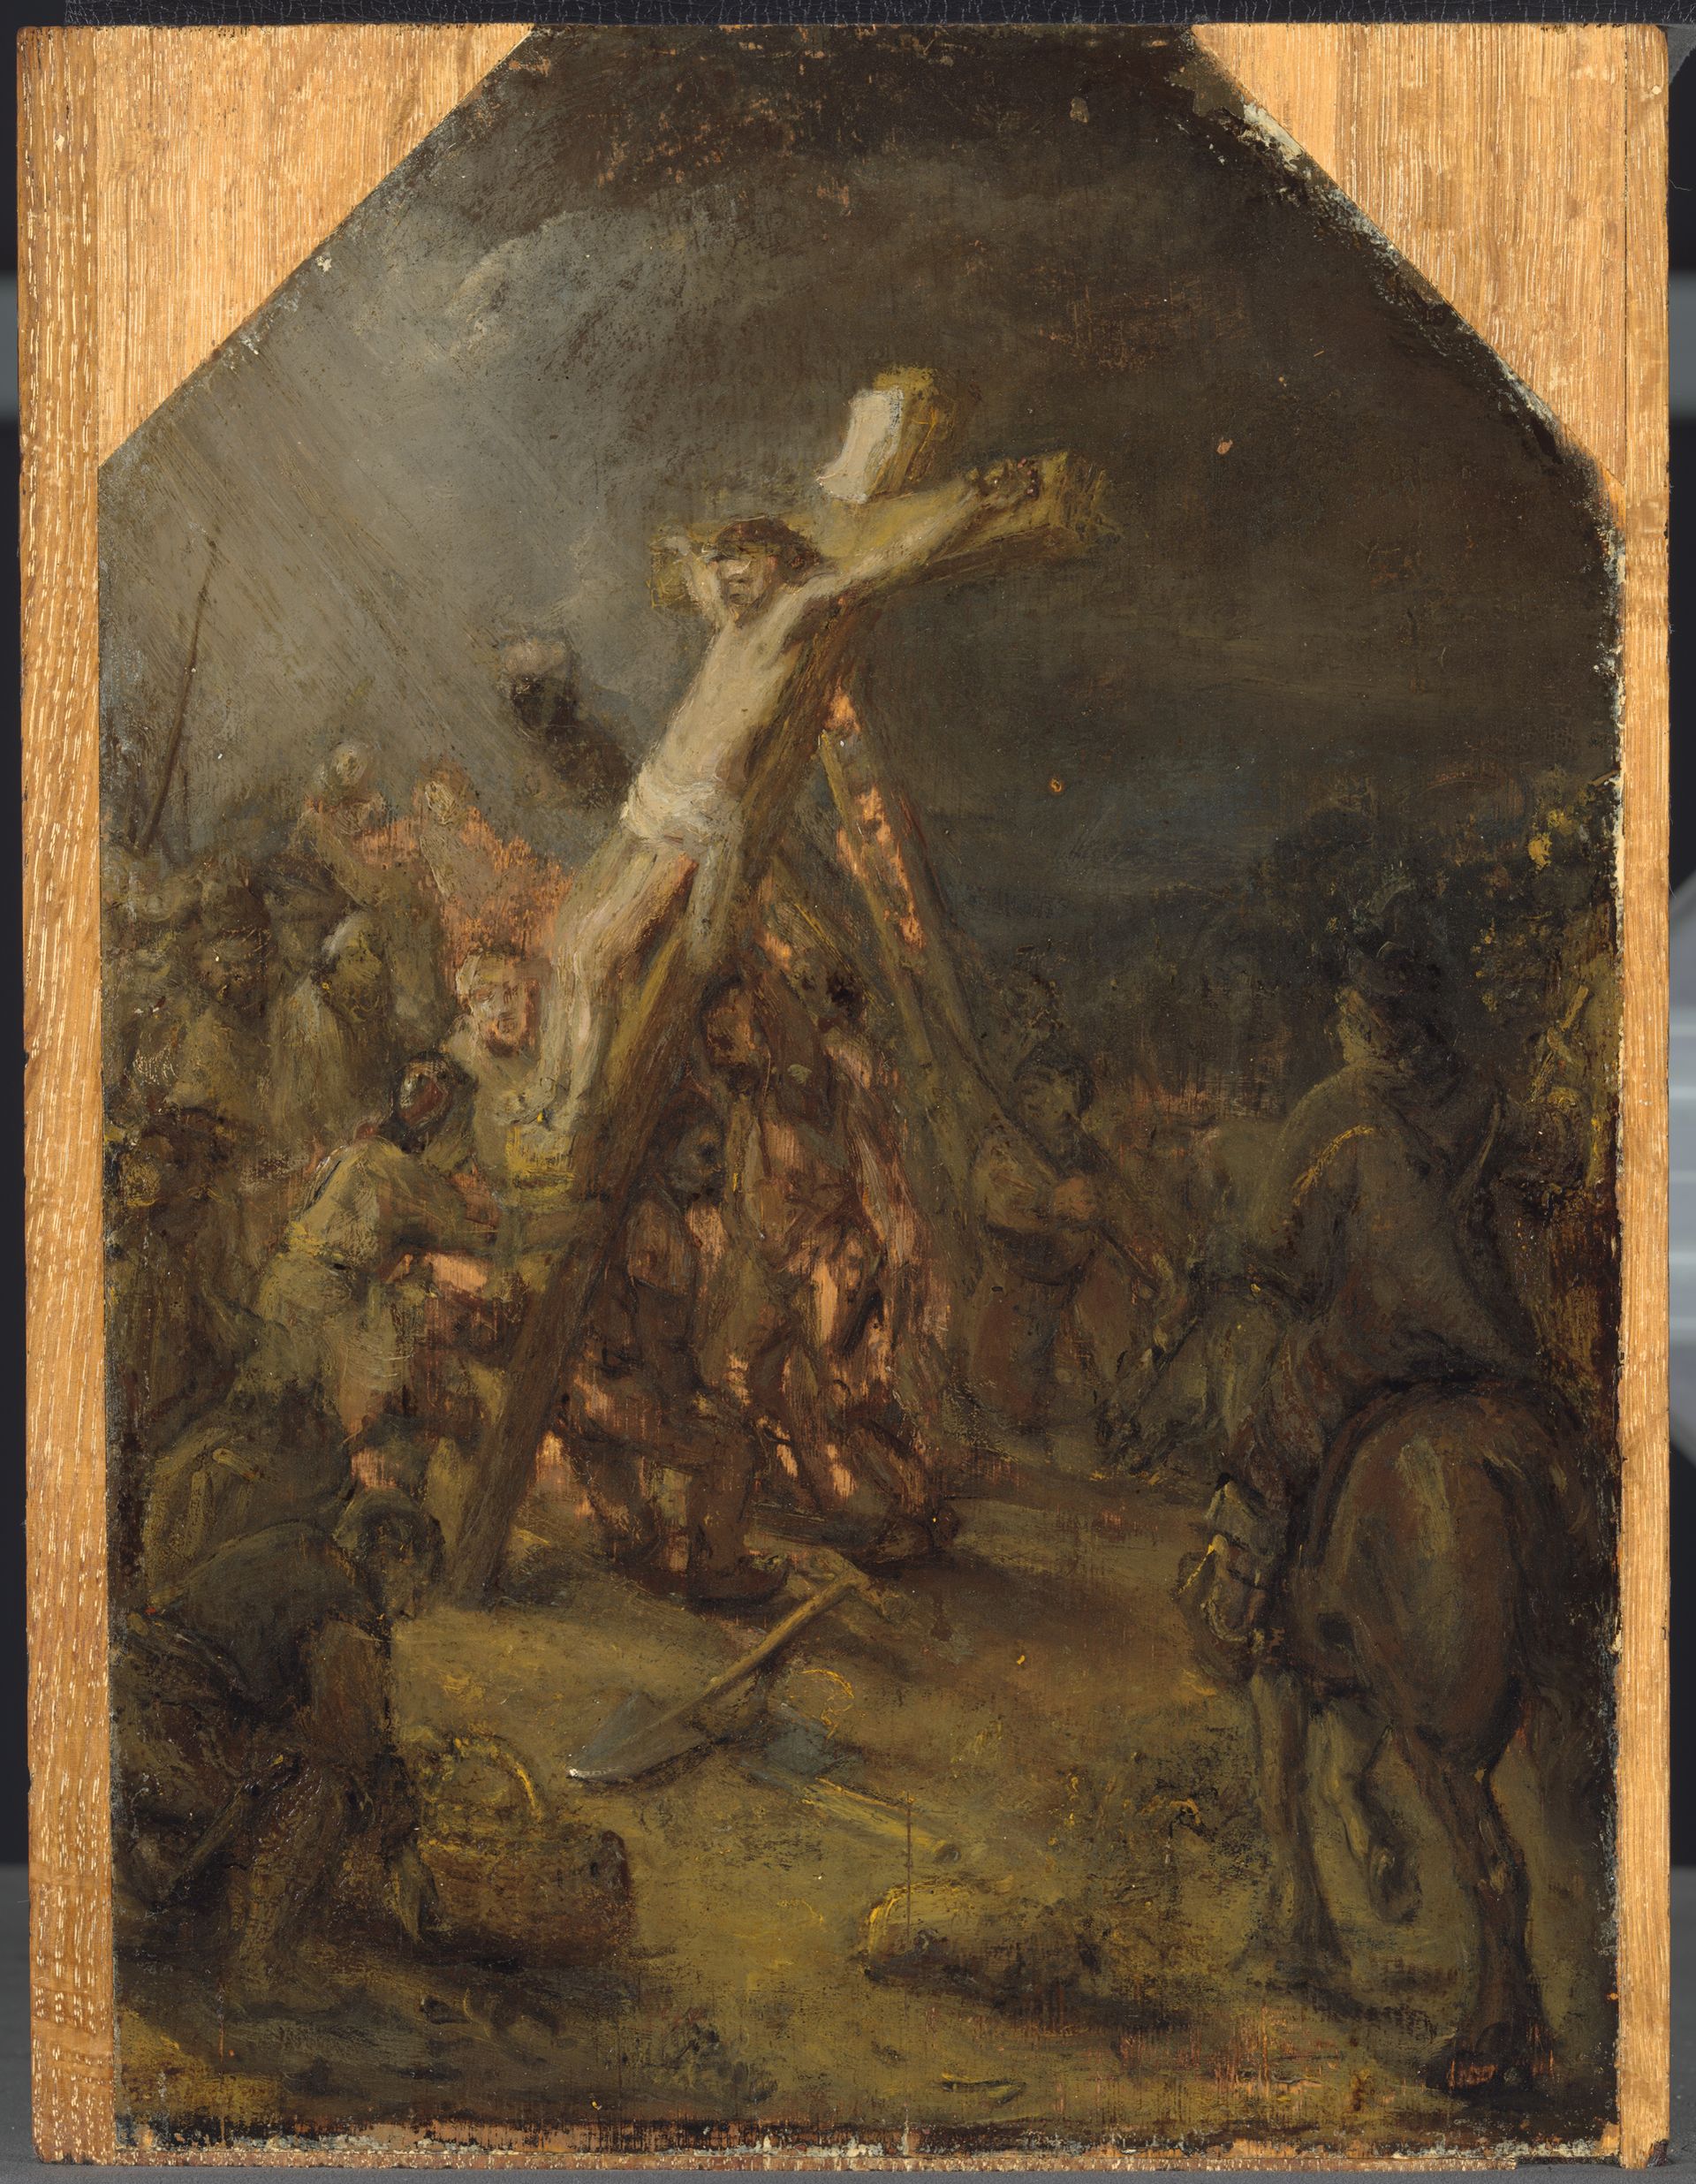 The Raising of the Cross (around 1645), thought now to be by Rembrandt